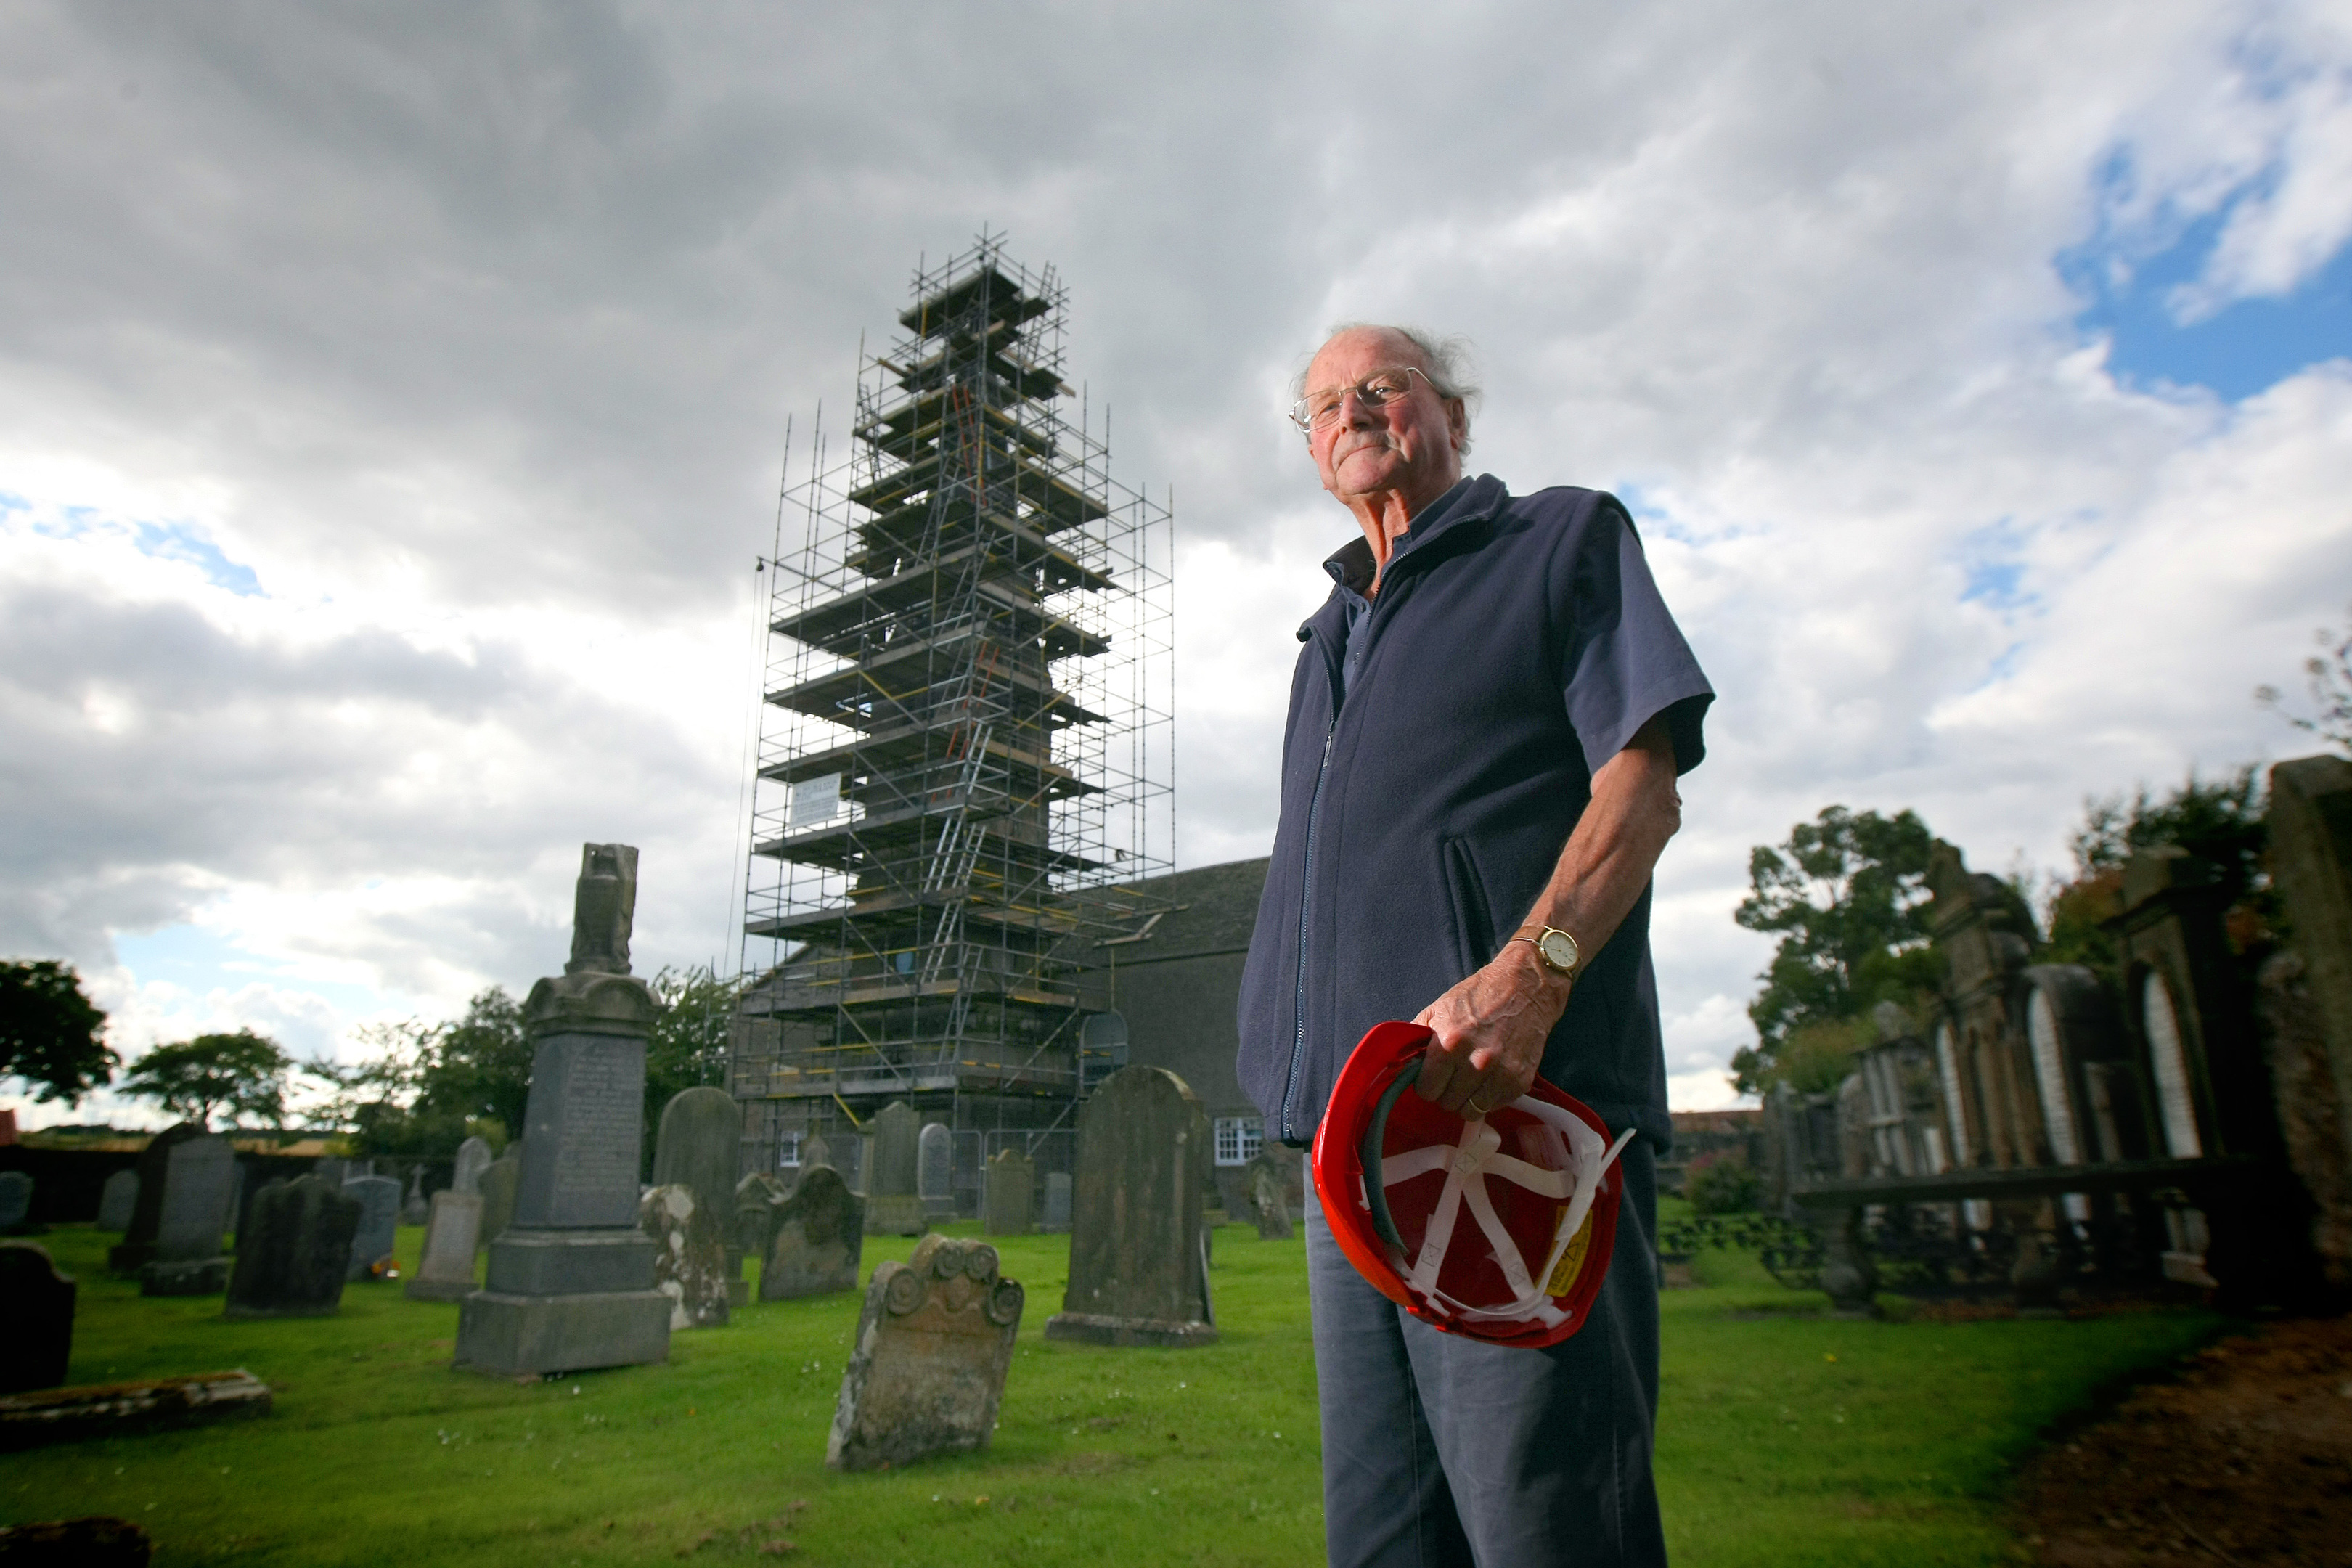 Retired surveyor Ian Ramsay is overseeing the renovation of the steeple at Kingsbarns Church.